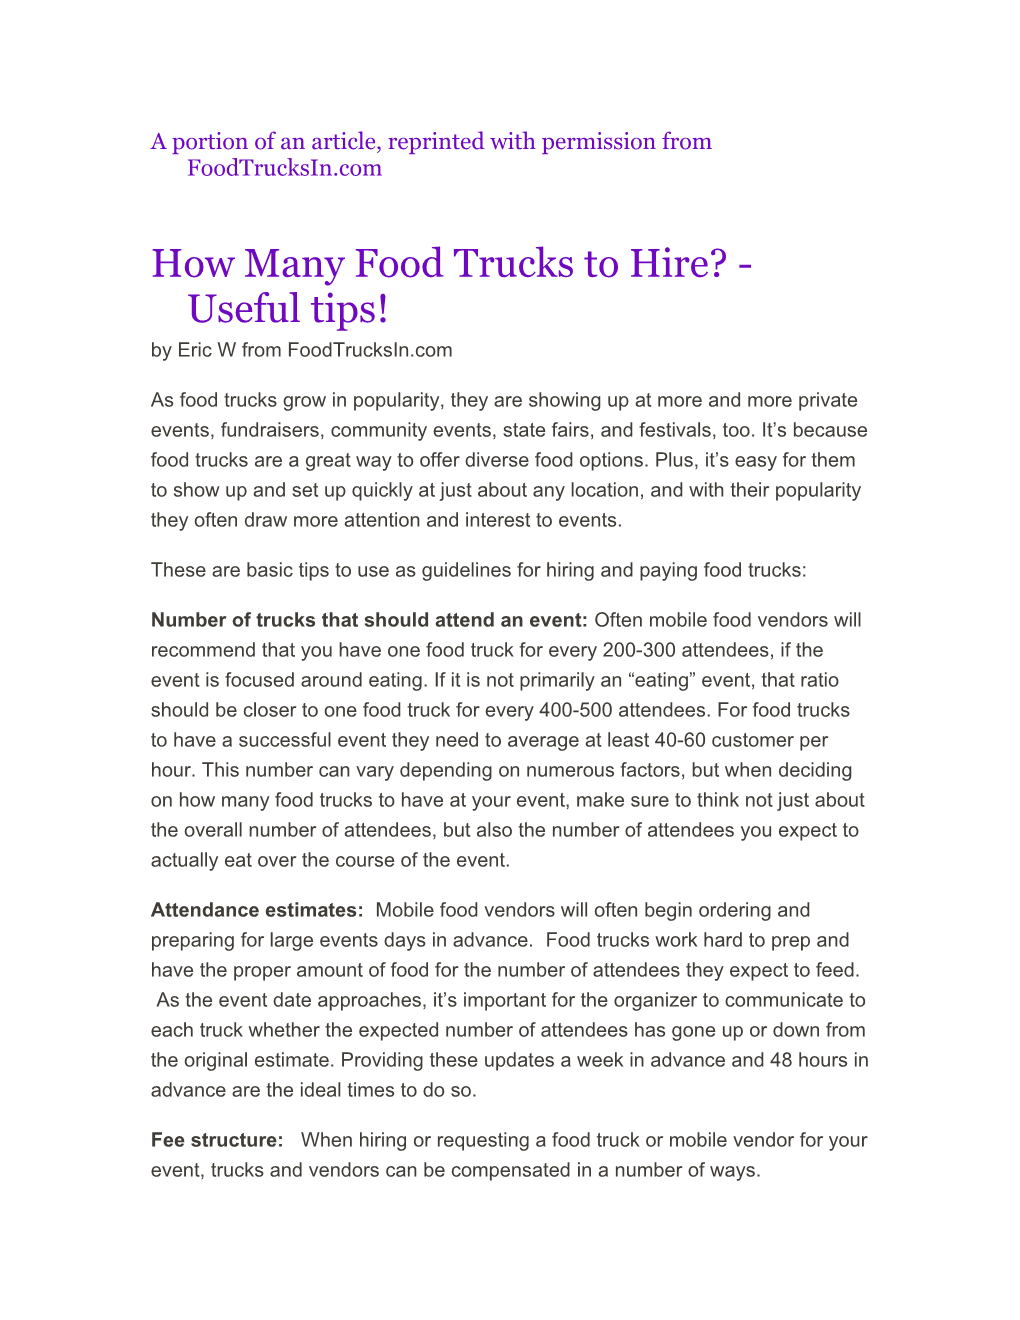 How Many Food Trucks to Hire